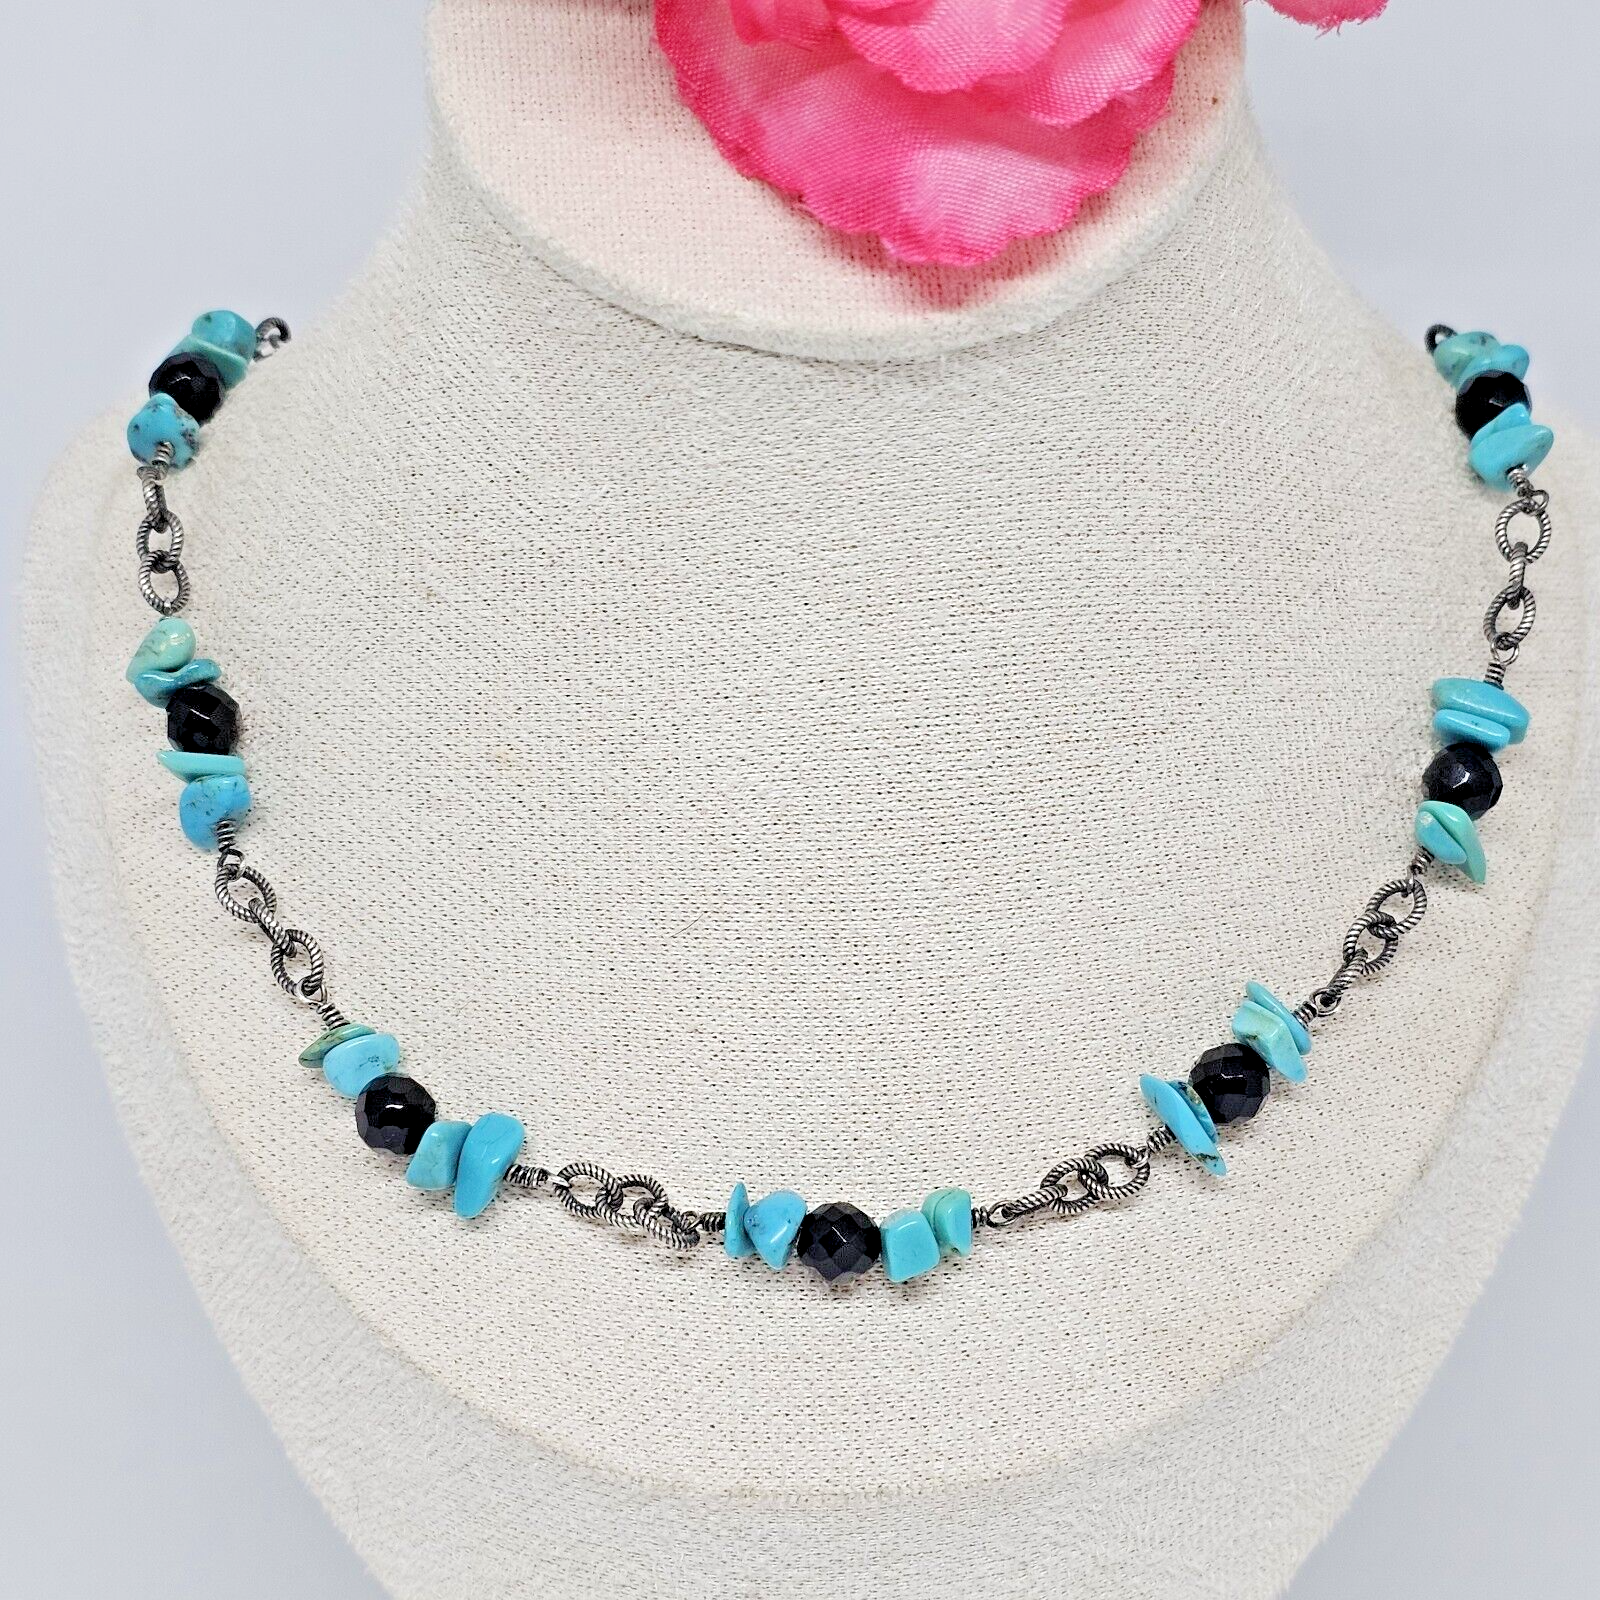 Silpada 925 Sterling Silver - Turquoise & Black Onyx Beaded Choker Necklace - $34.95